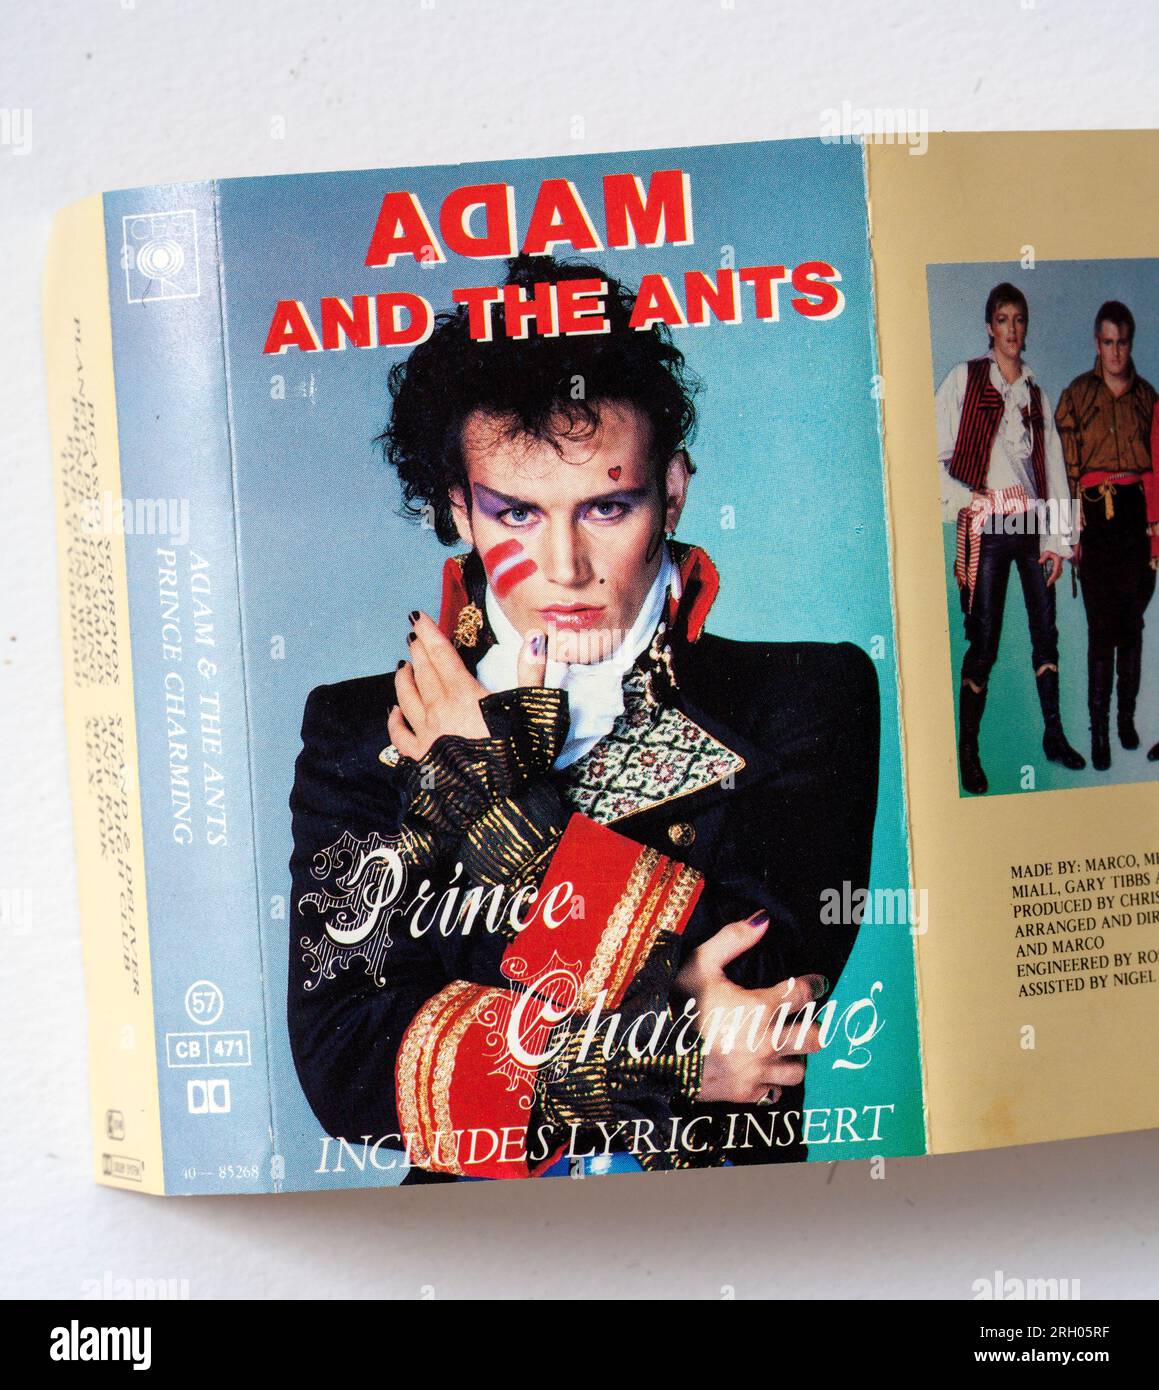 Adam and the Ants Prince Charming Music Cassette Tape Stock Photo